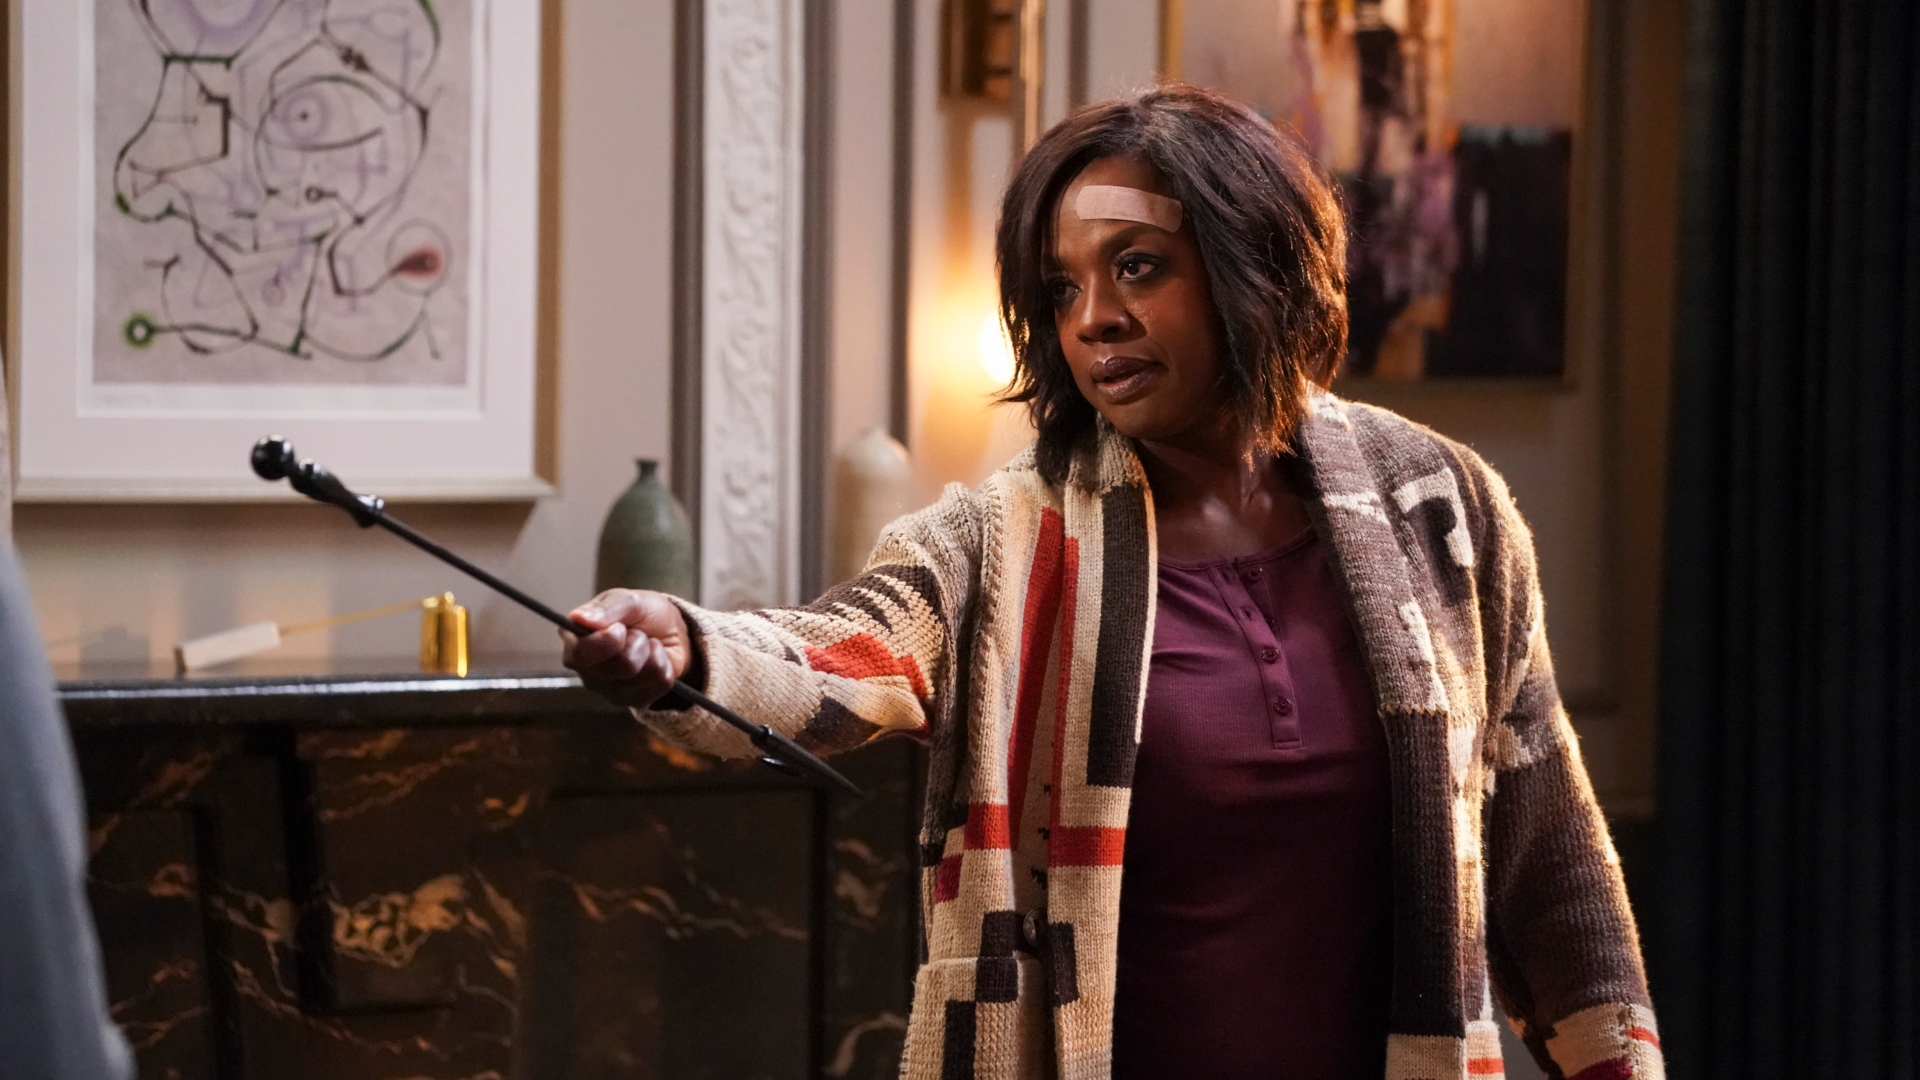 How To Get Away With A Murderer Streaming How to Get Away with Murder: Annalise ameaça fugir no episódio 6x06